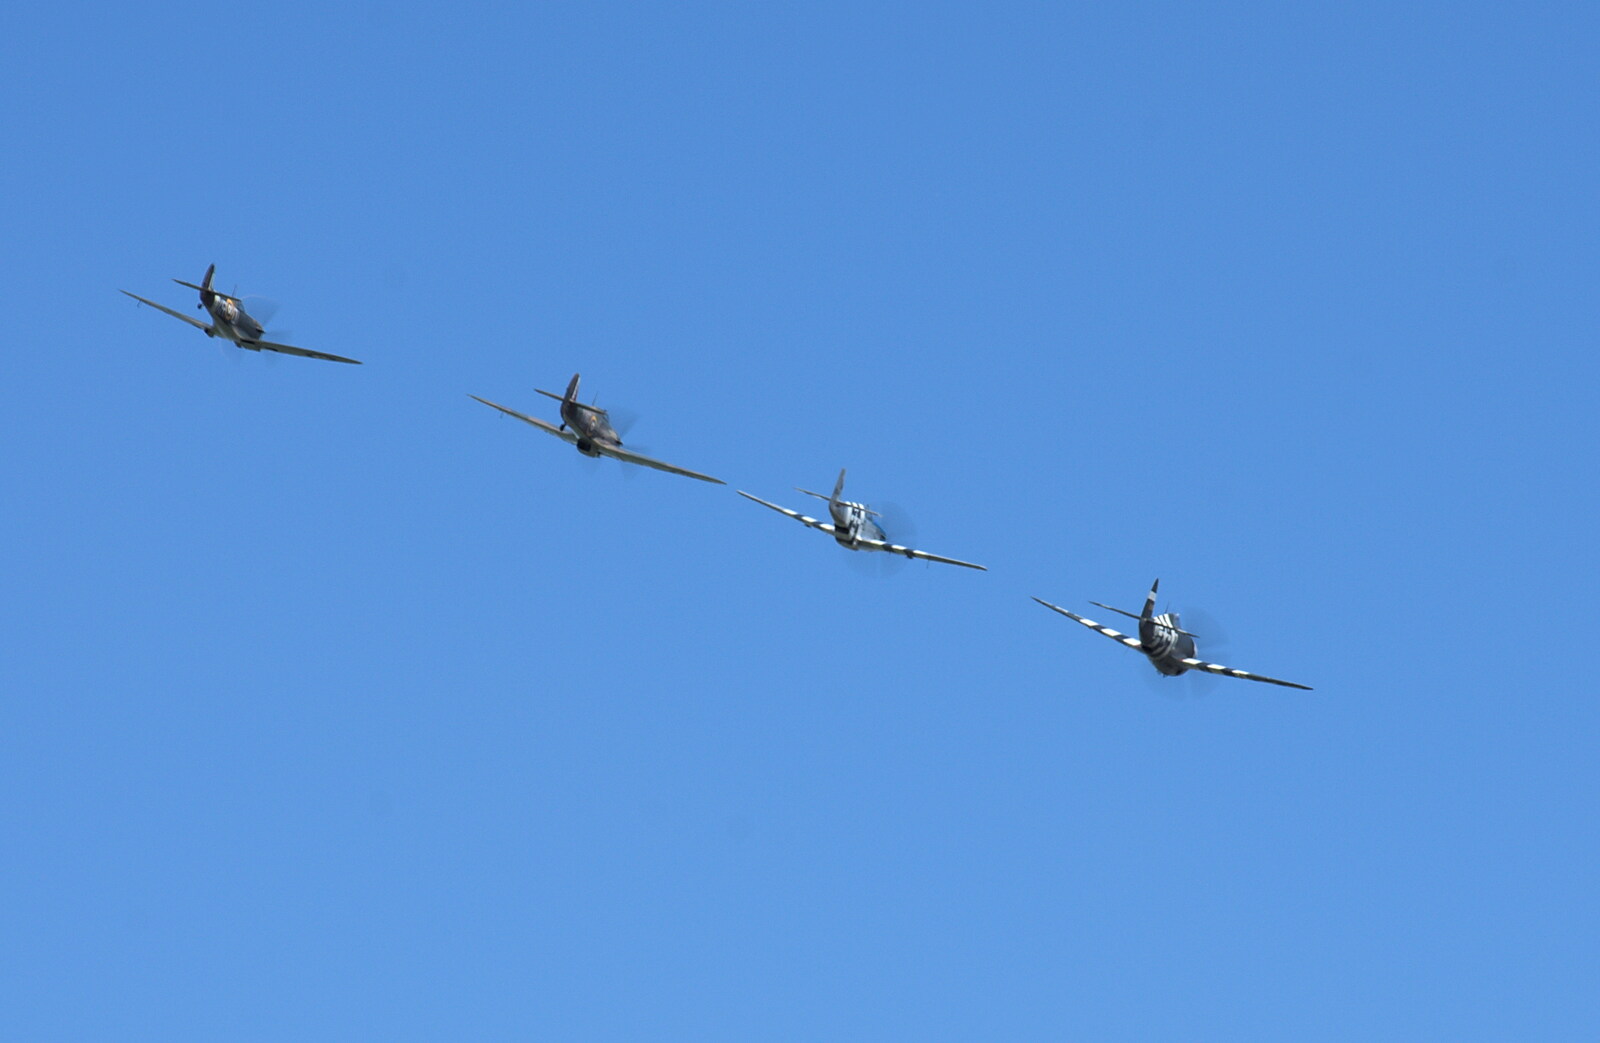 Thunderbolt, Mustang, Hurricane and Spitfire from A "Sally B" B-17 Flypast, Thorpe Abbots, Norfolk - 27th May 2013